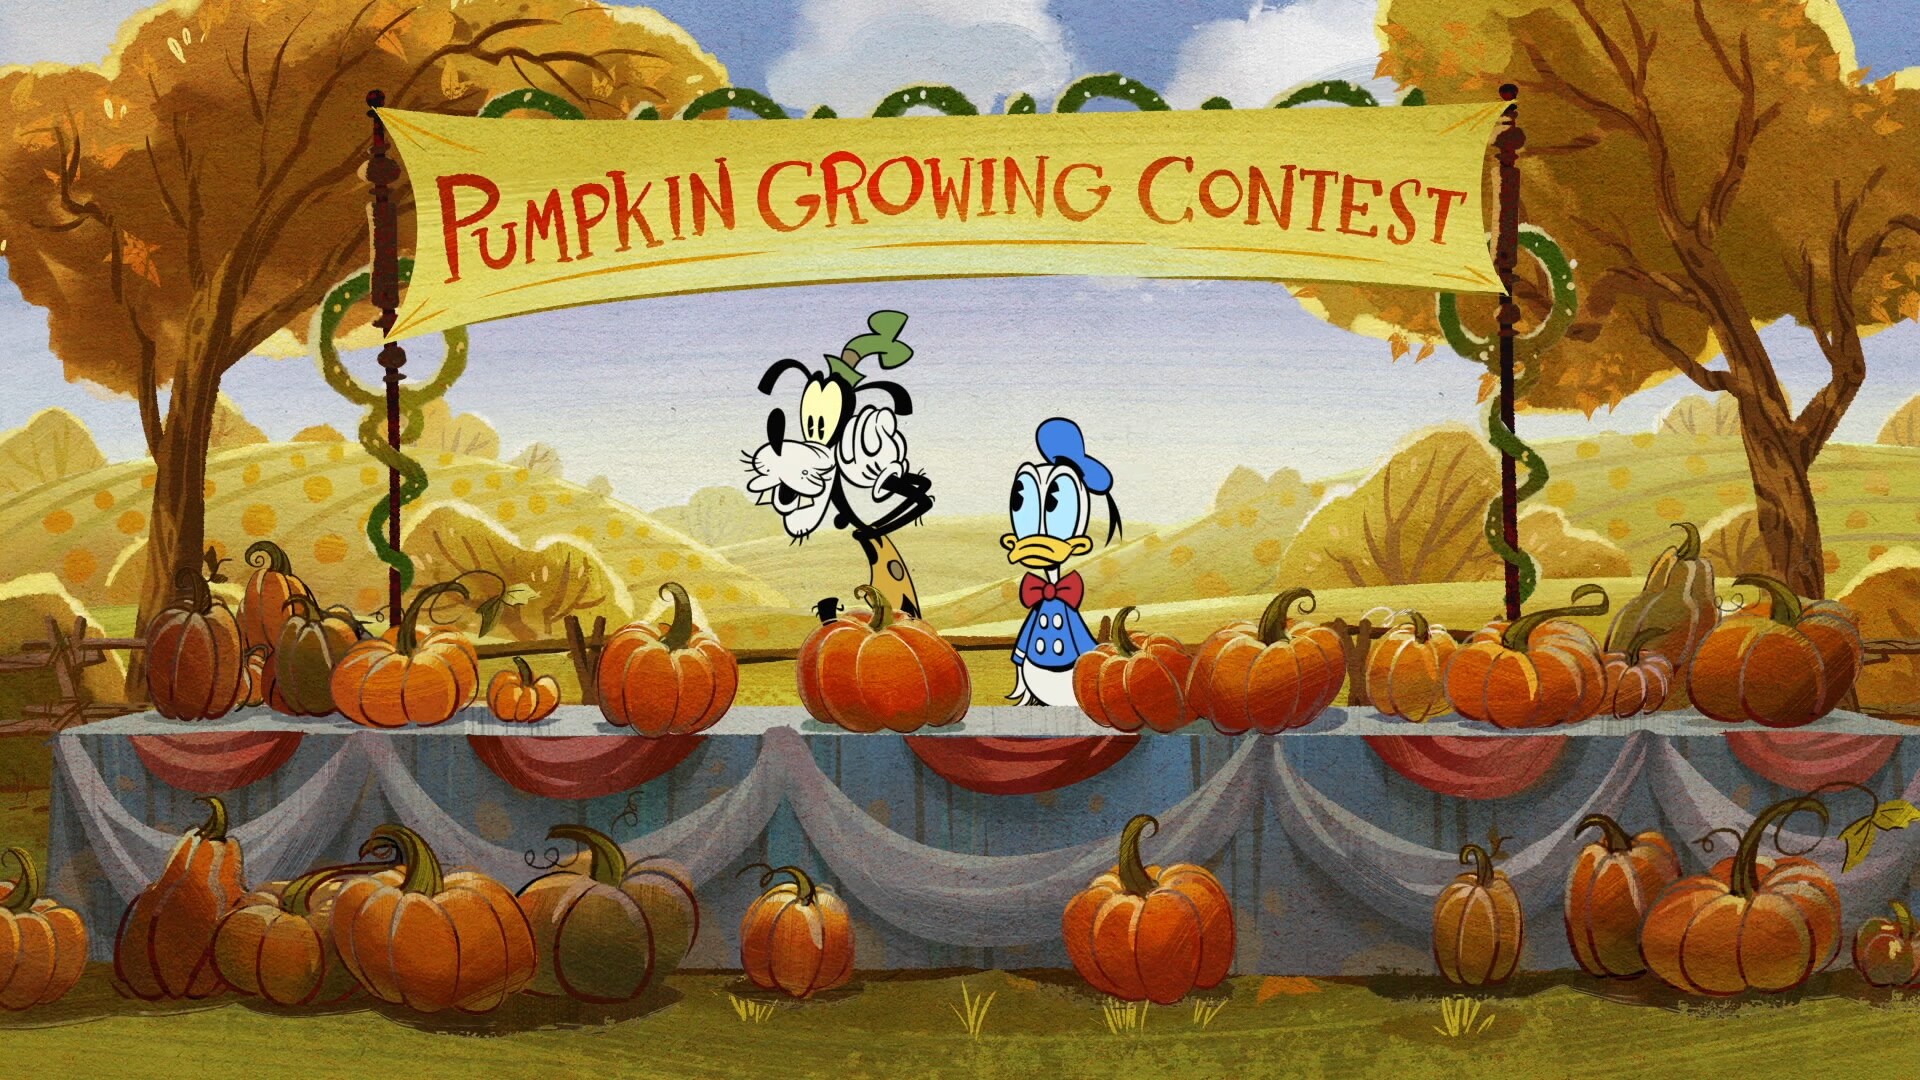 Mickey Mouse is determined to undo the failures of the past after he inherits an old family pumpkin farm.